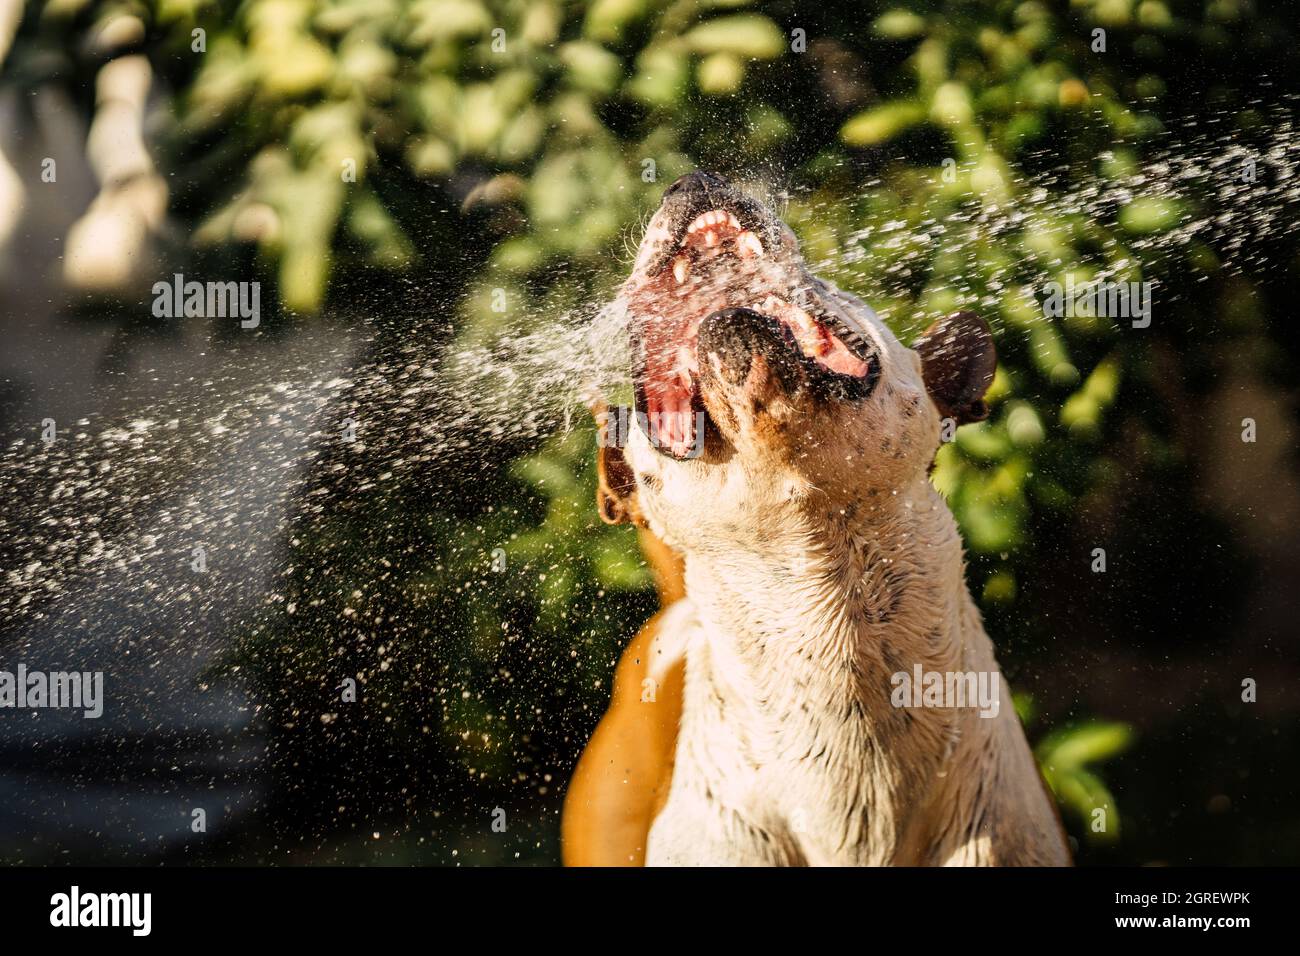 Dog opening the mouth while playing with a jet of water in a garden Stock Photo